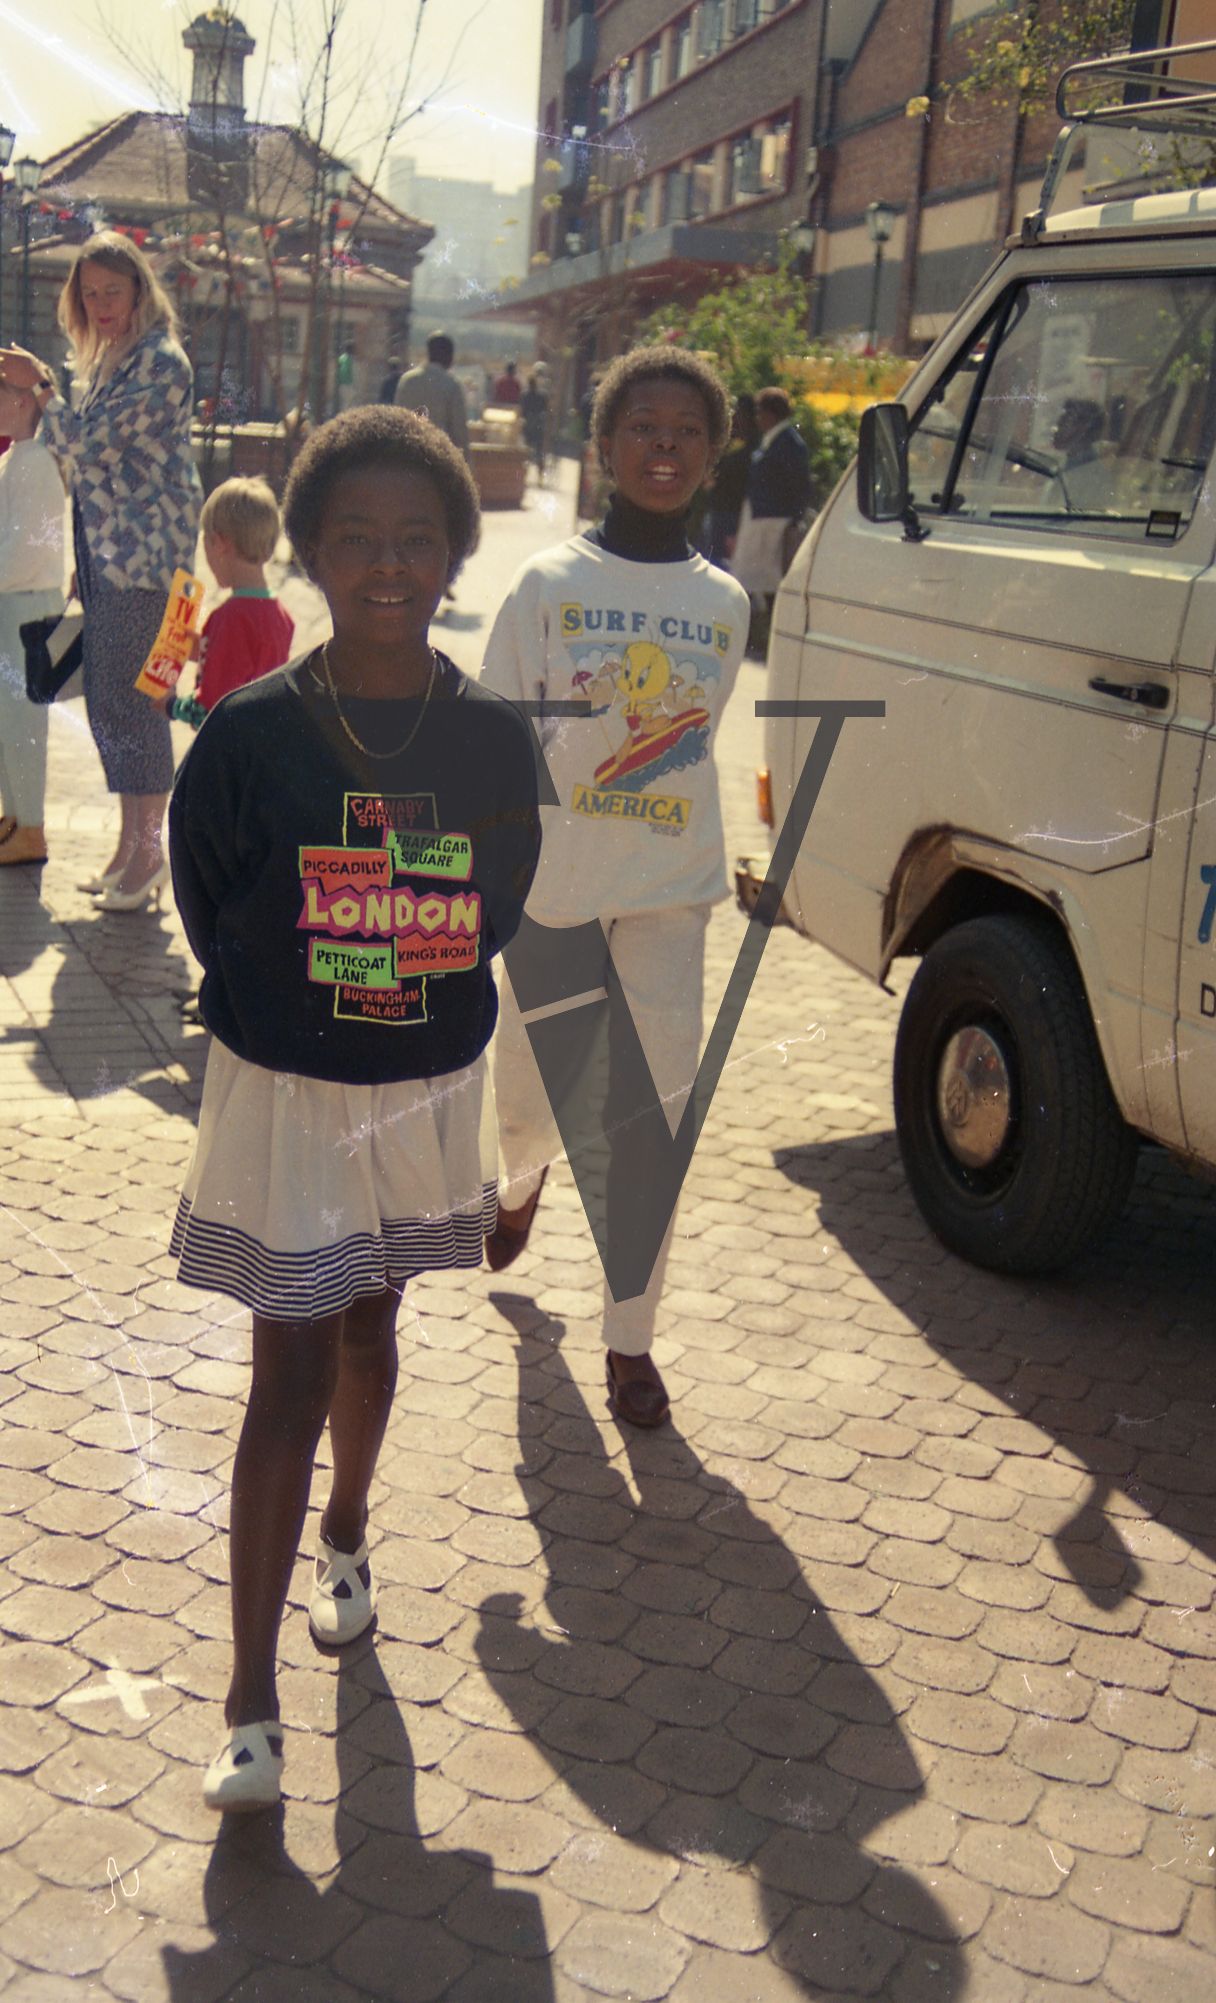 South Africa, Soweto, street scene, two Black girls in foreground, smiling, figurative, white family in background, van, people.